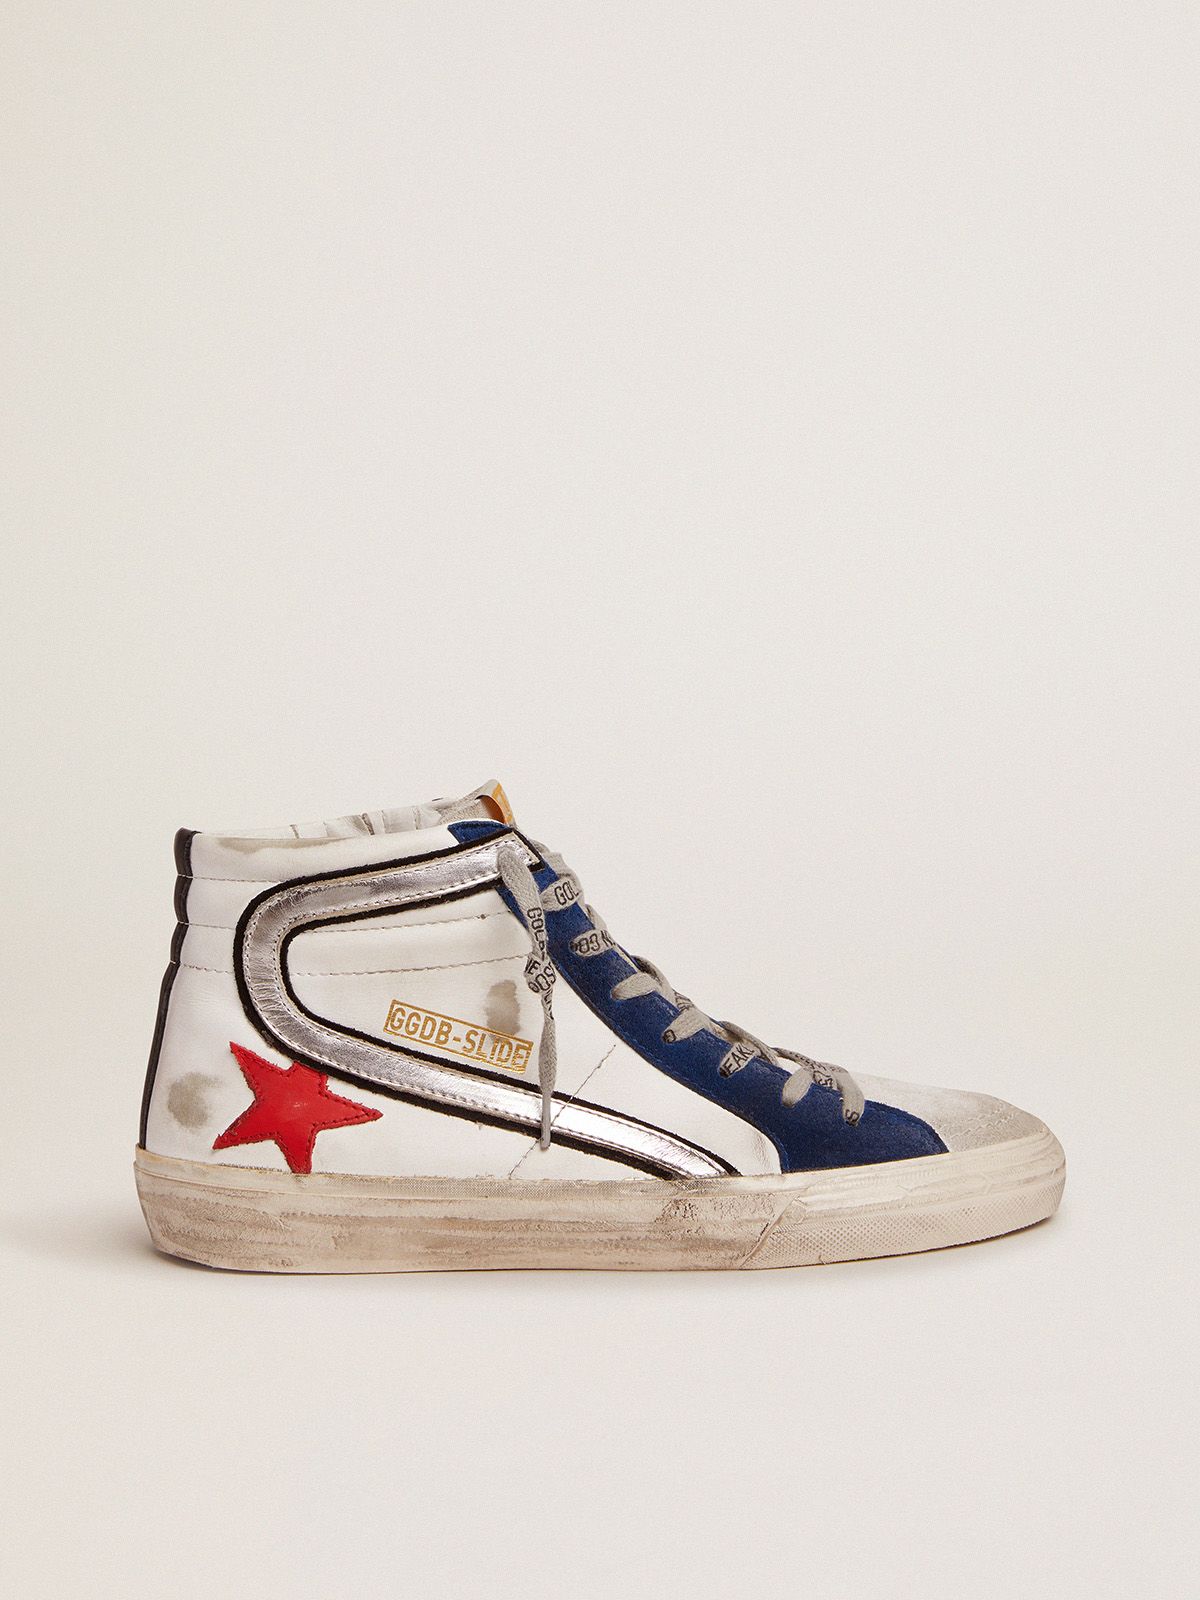 Slide sneakers in white leather with red leather star | 